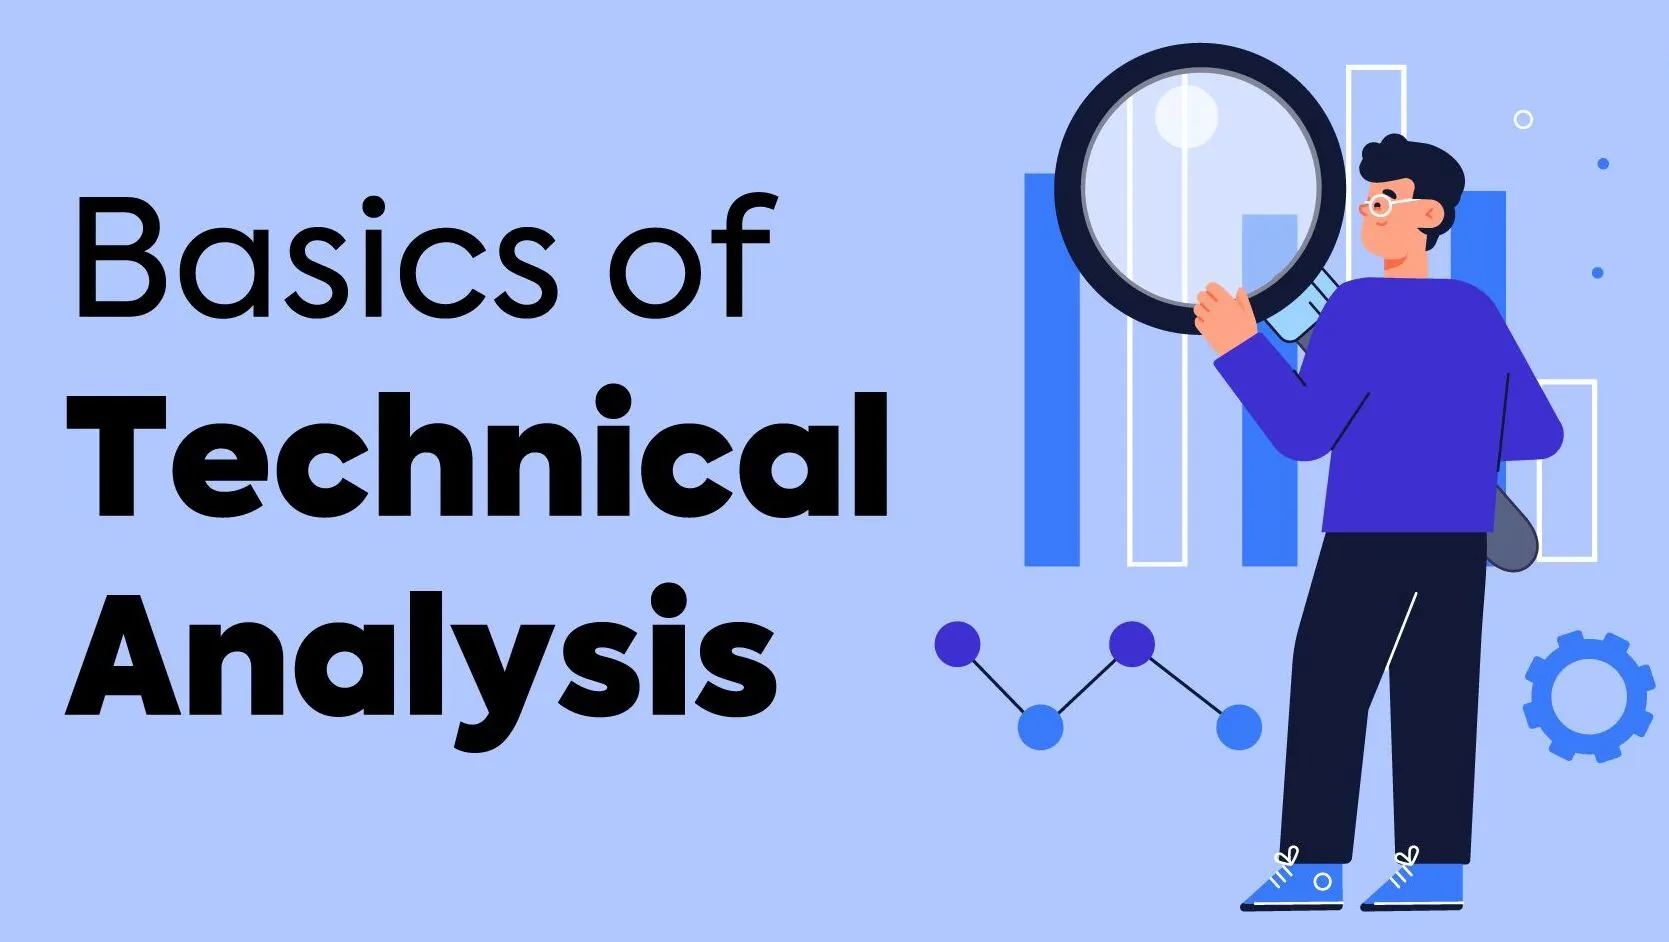 Use technical analysis tools to enhance trading and maximize returns